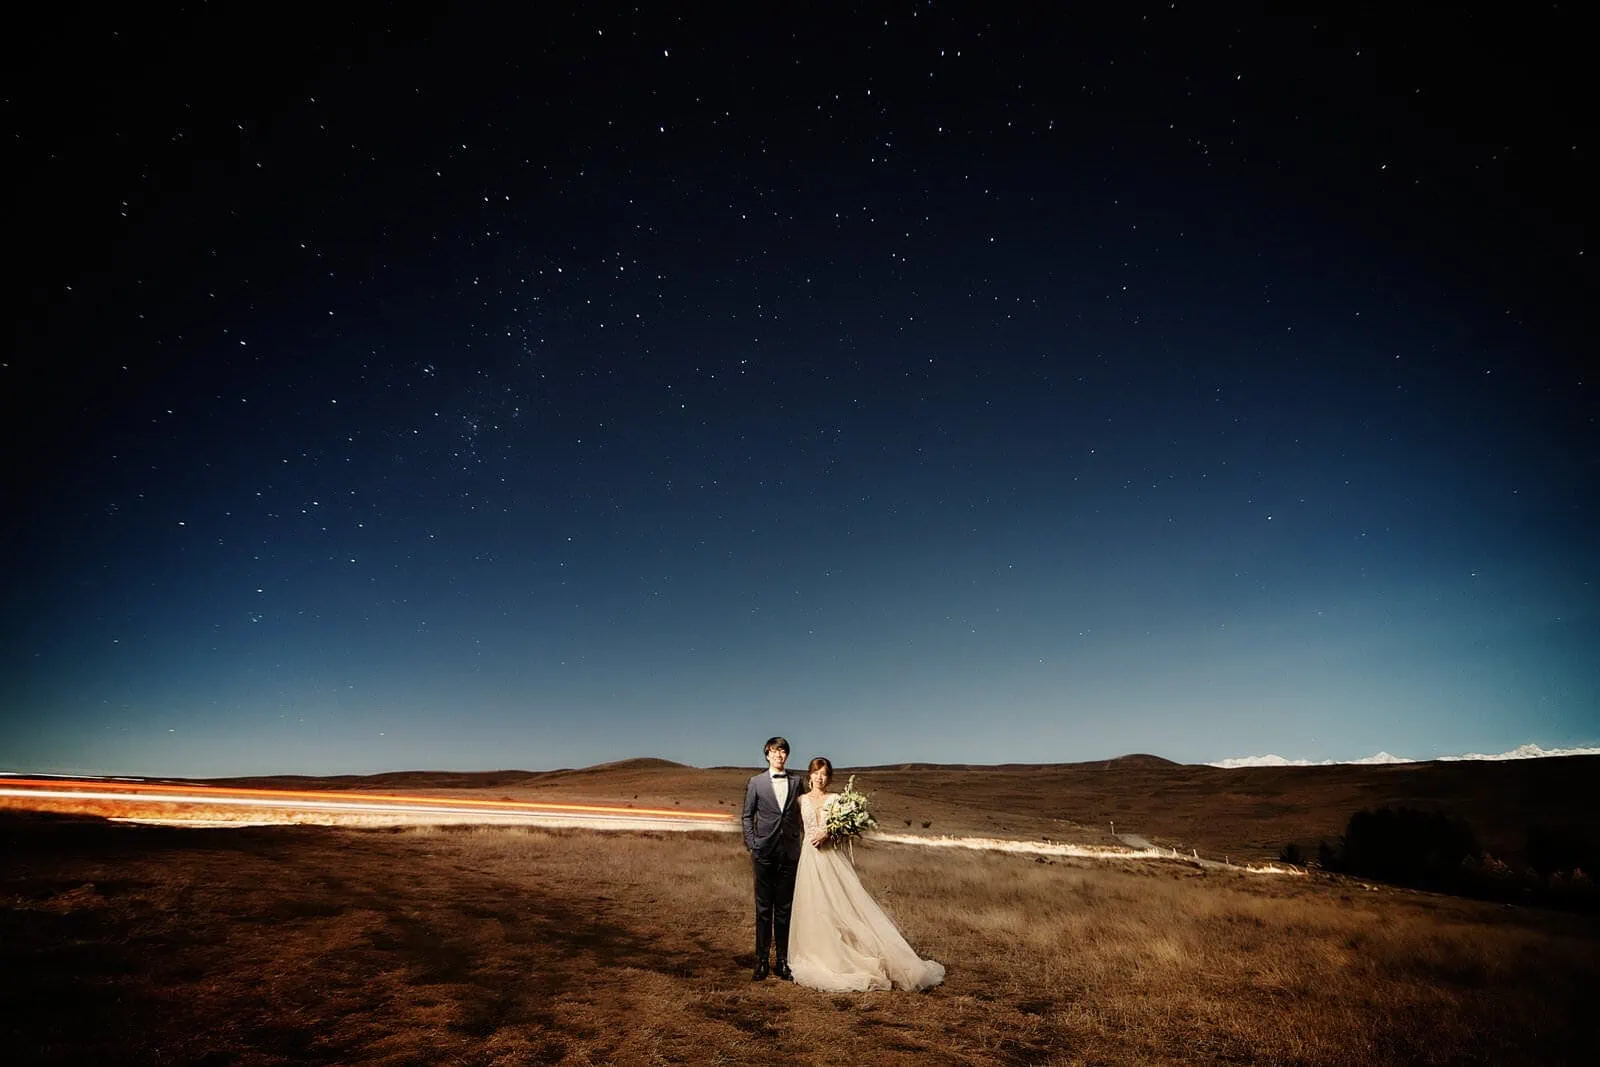 Queenstown New Zealand Elopement Wedding Photographer - A stunning Starry Night Shoot capturing a radiant bride and groom under the enchanting starry sky, adding a breathtaking scene to their photography portfolio.